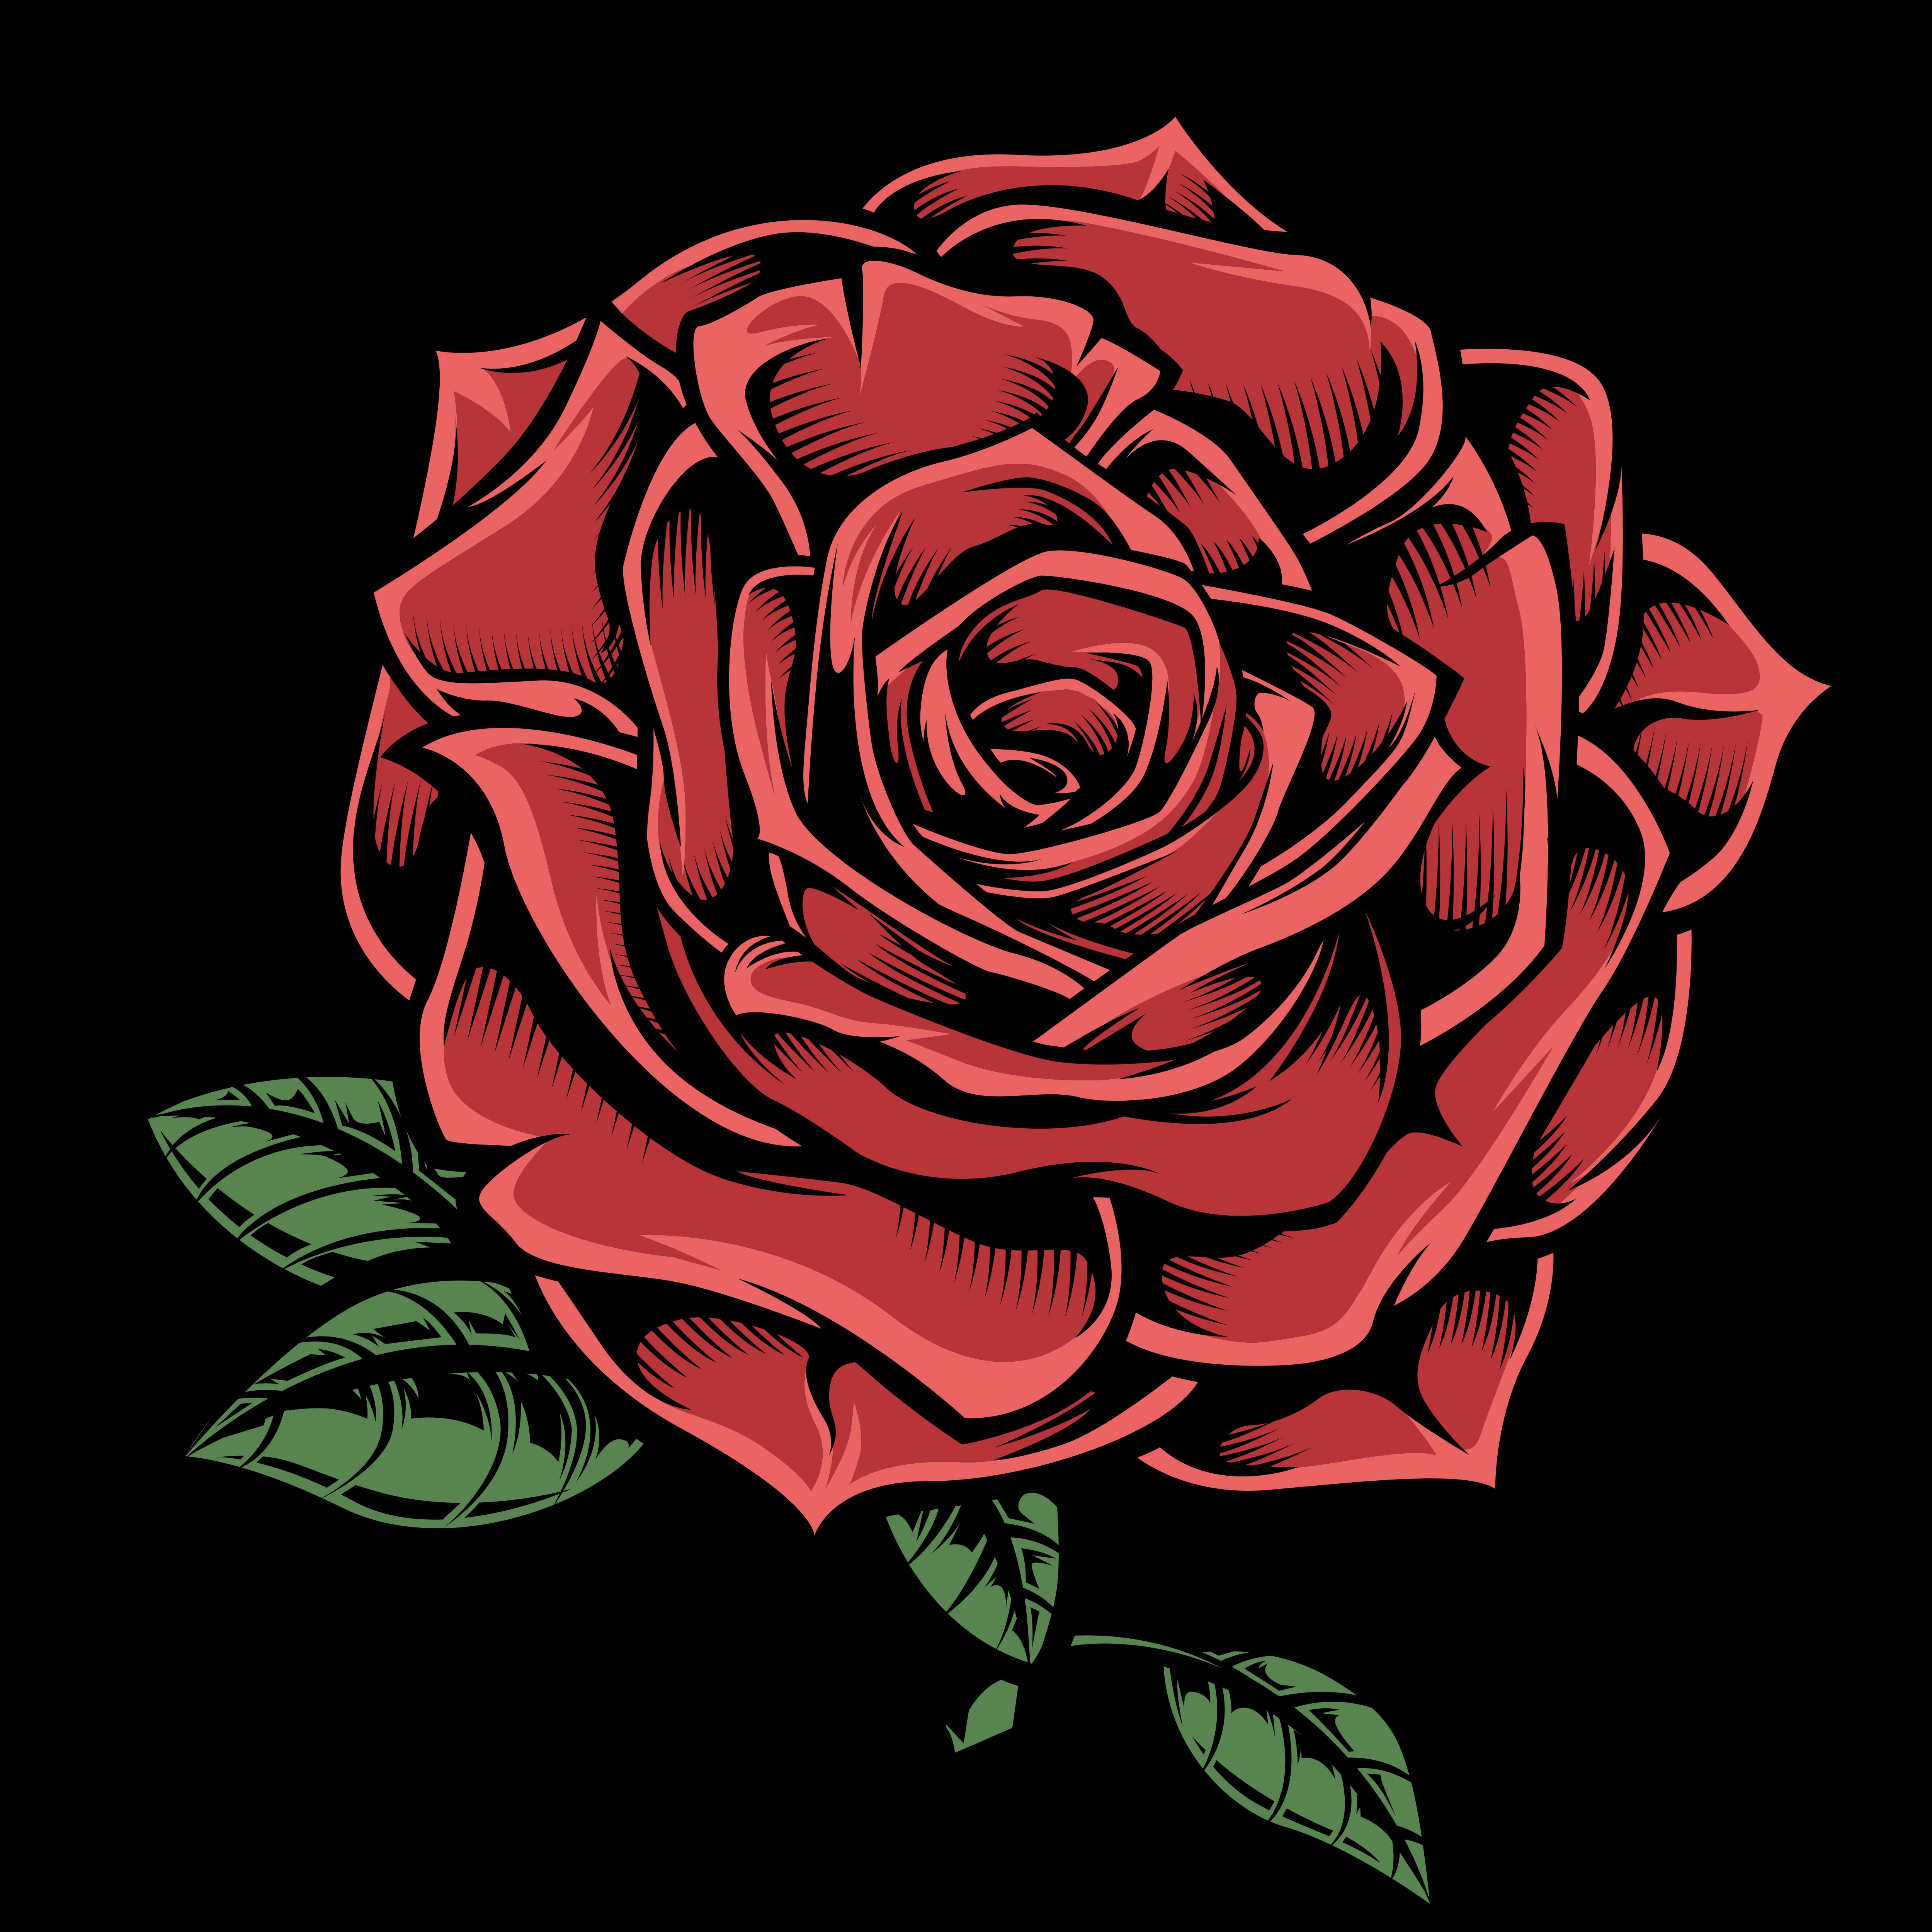 Download Hand Drawn Red Rose on Black - Download Free Vectors ...